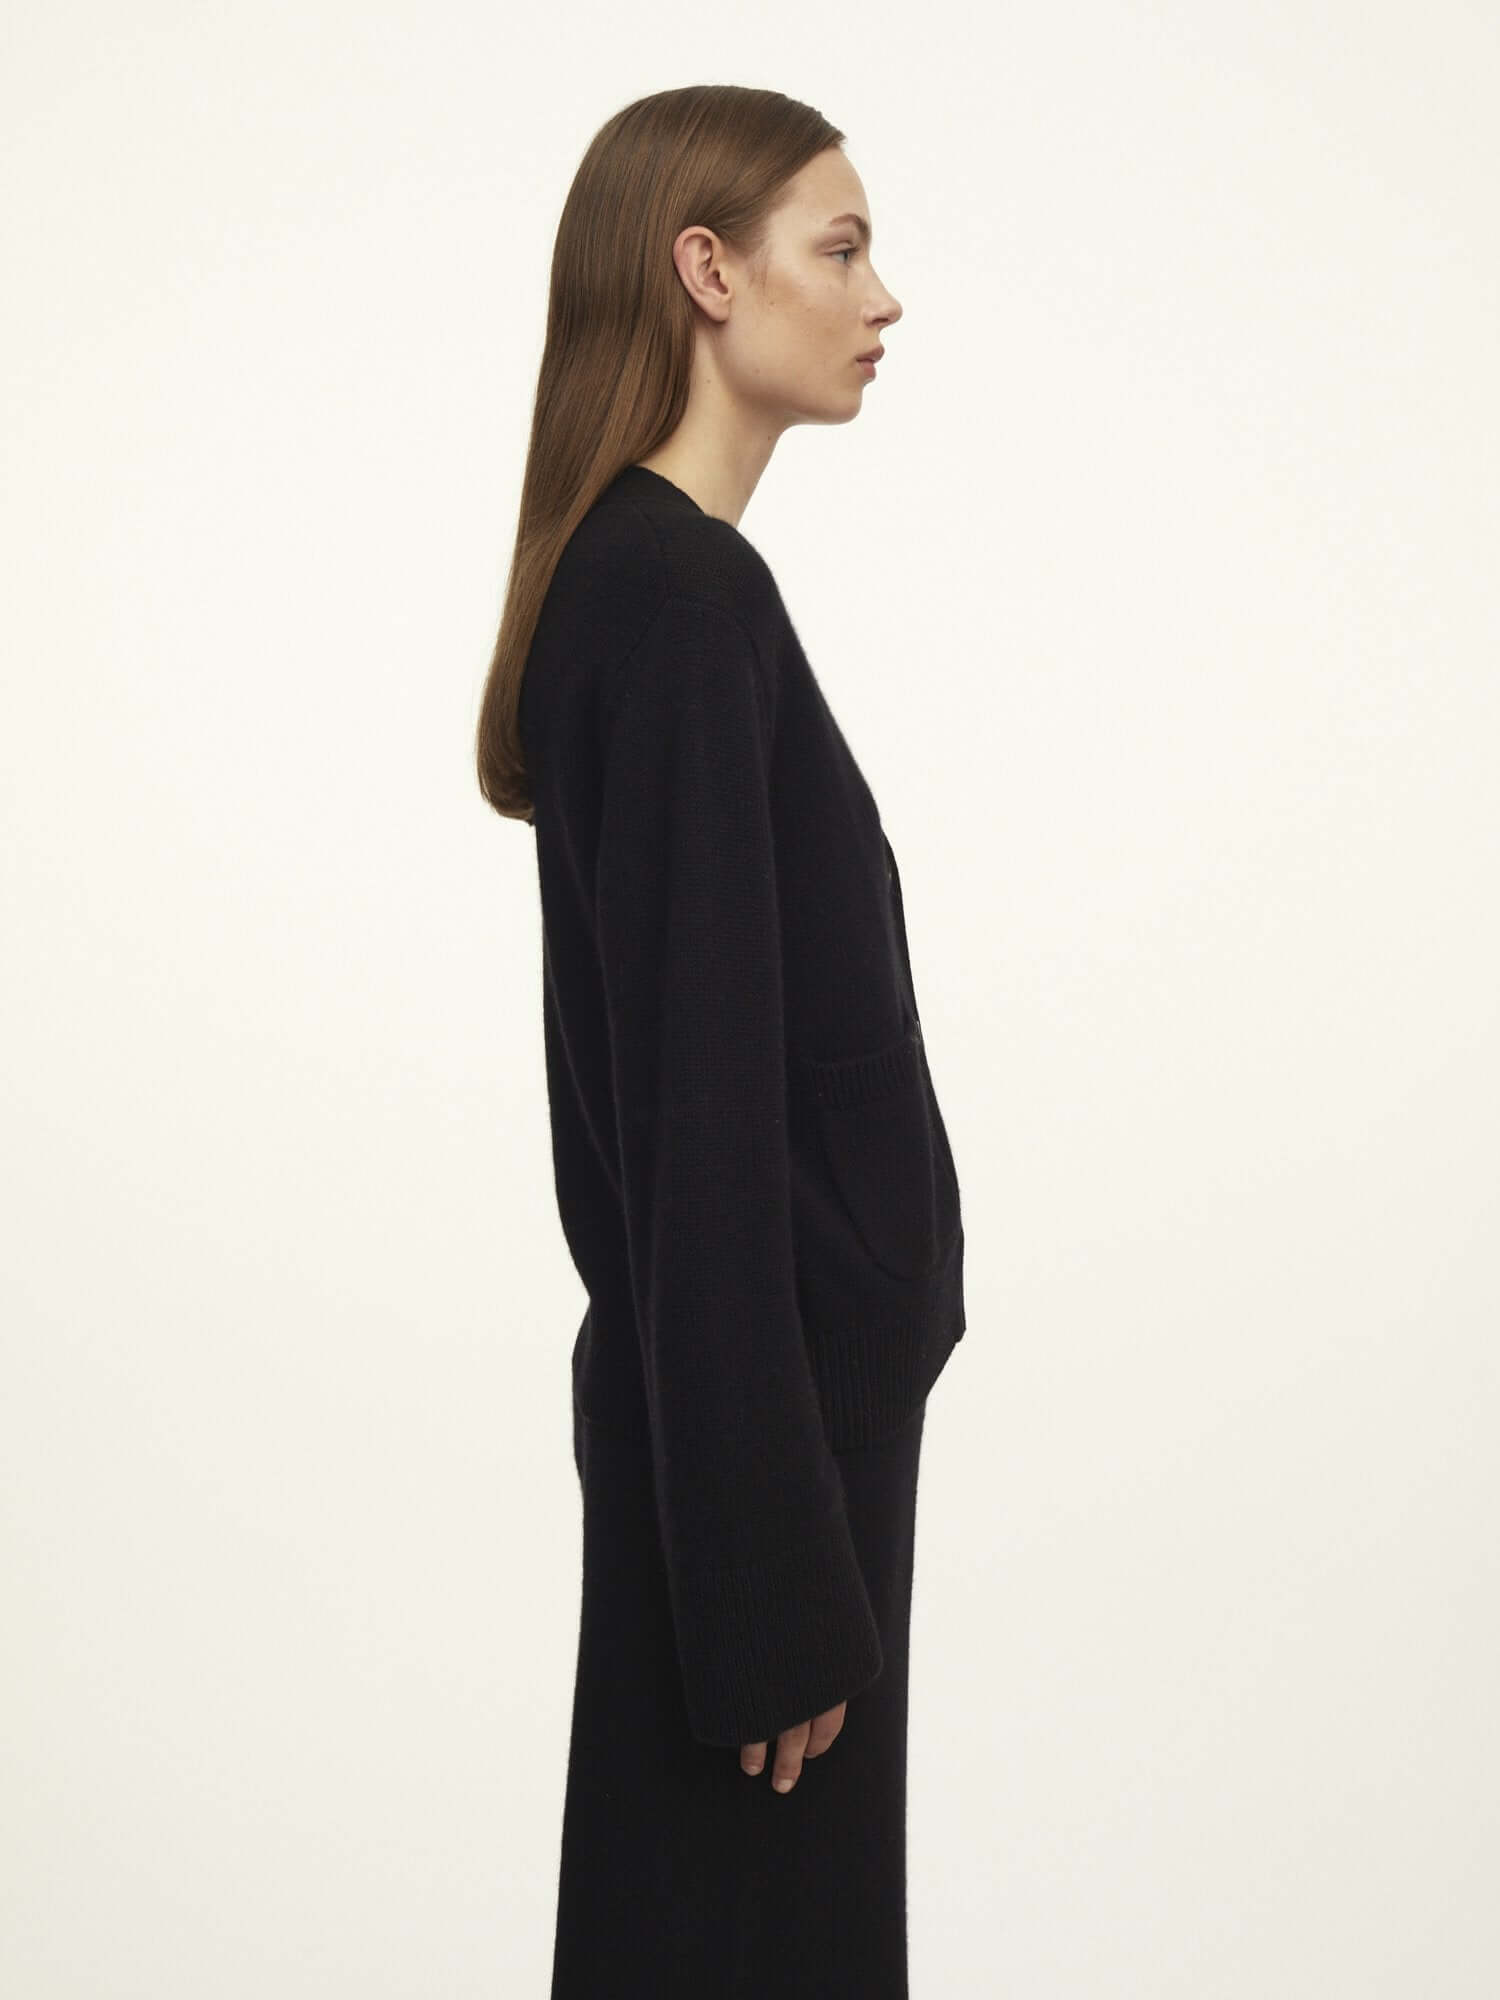 Lisa Yang Danni Cashmere Cardigan in Black from The New Trend